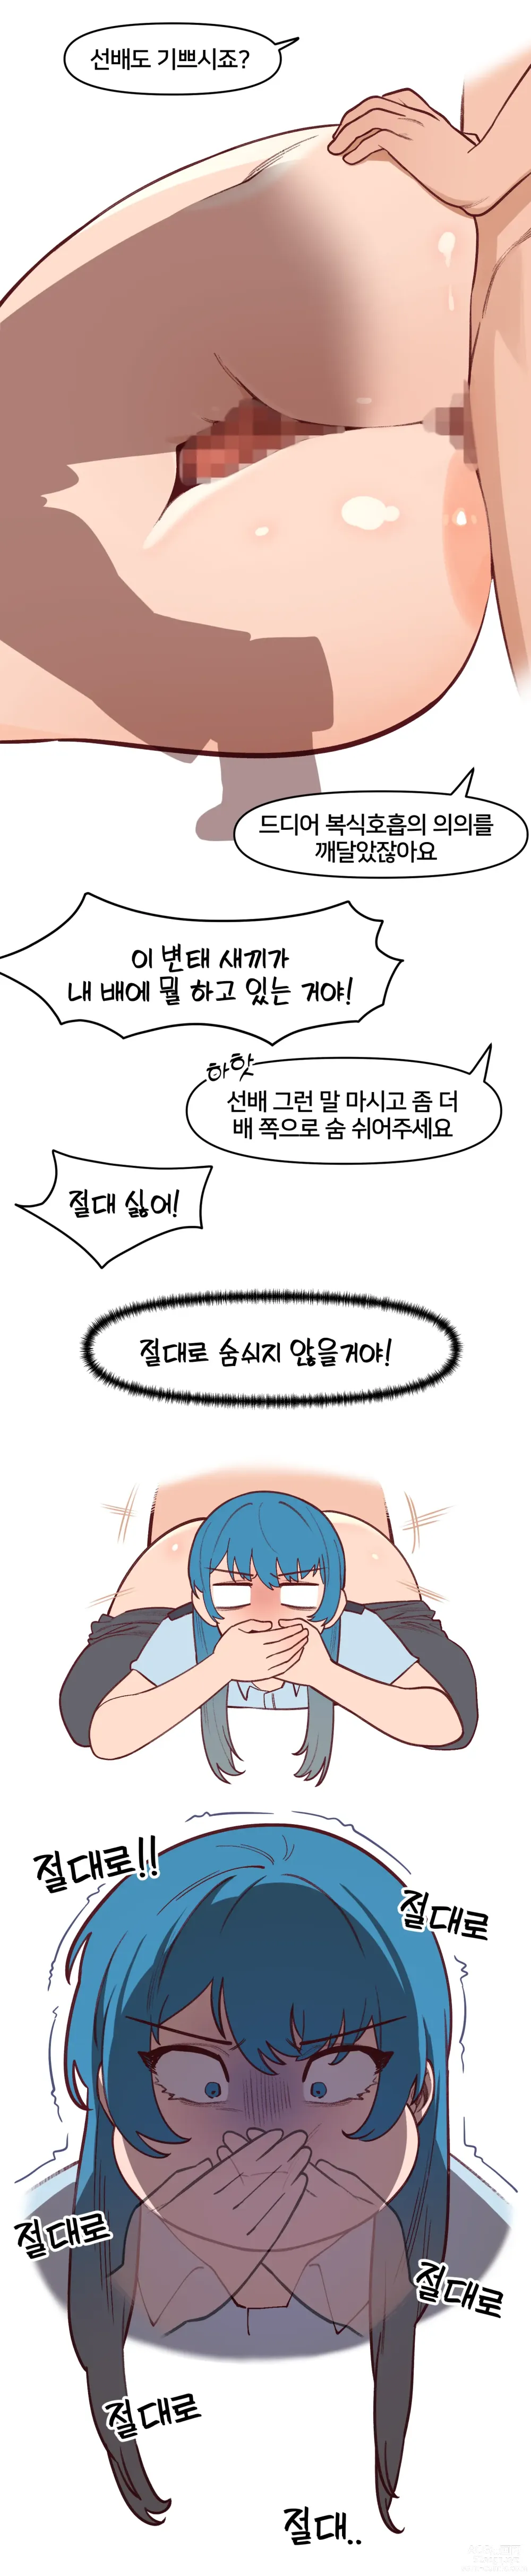 Page 6 of doujinshi 선배는 잠입수사형사